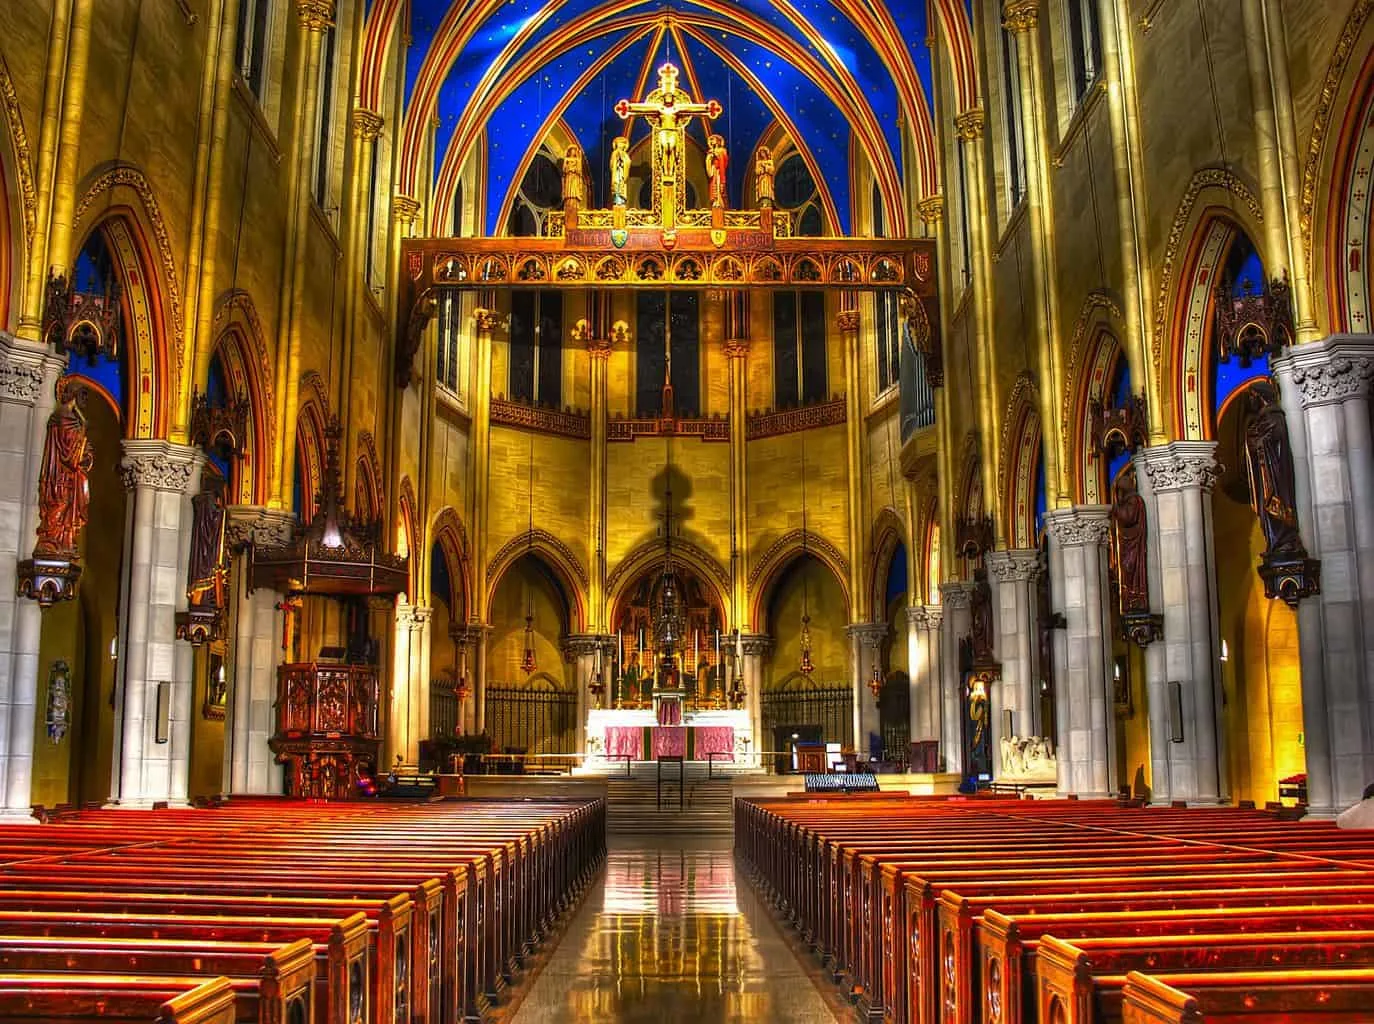 The expansive, blue, and gold interior of St. Mary the Virgin Church near Times Square, New York City (image sourced from Flickr.com). 